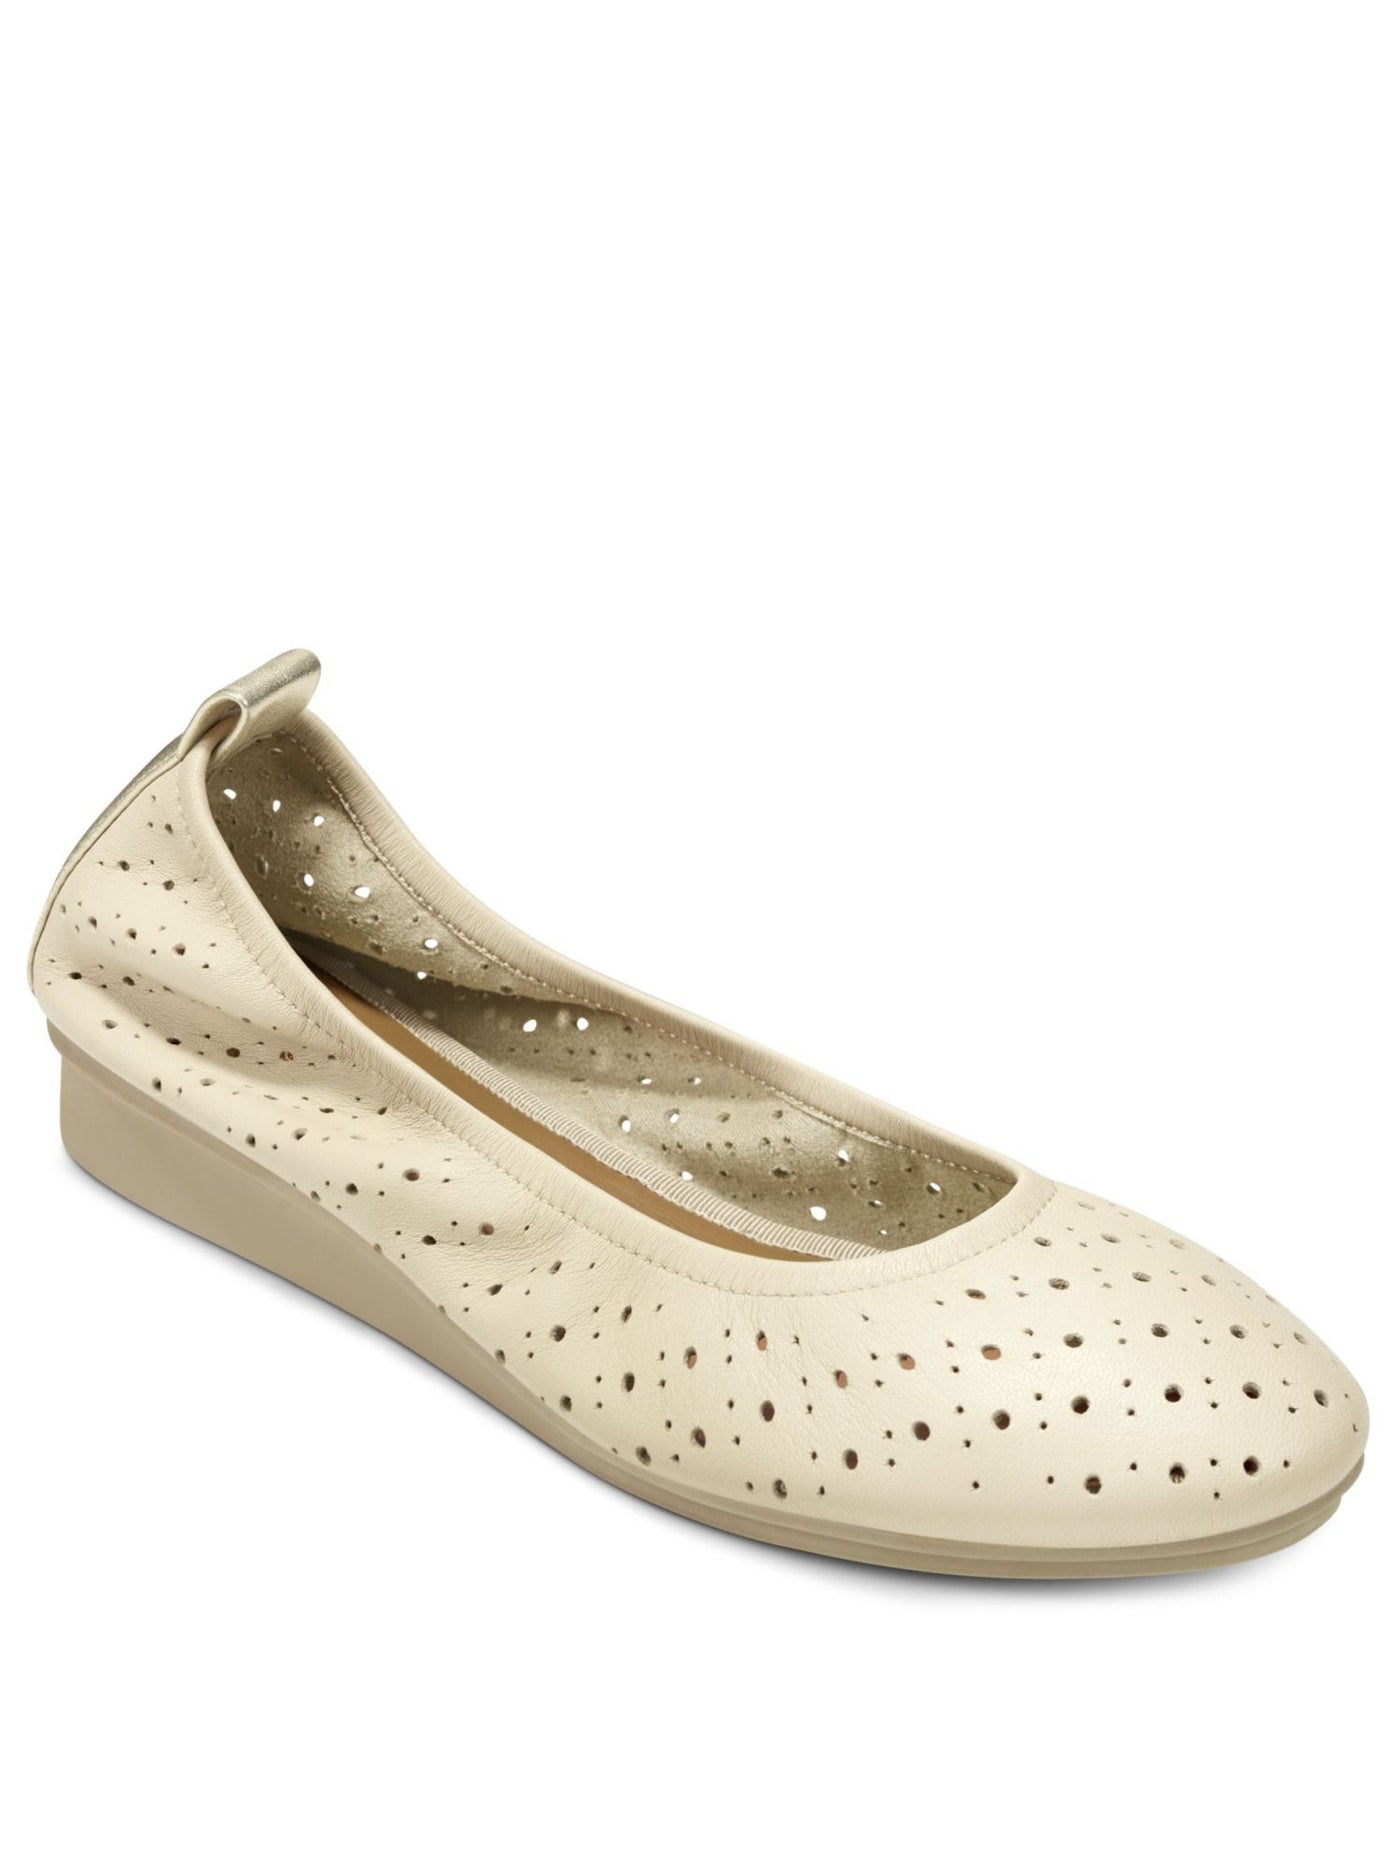 AEROSOLES Womens Ivory Perforated Heel Tab Stretch Comfort Wooster Round Toe Wedge Slip On Leather Ballet Flats 7.5 M